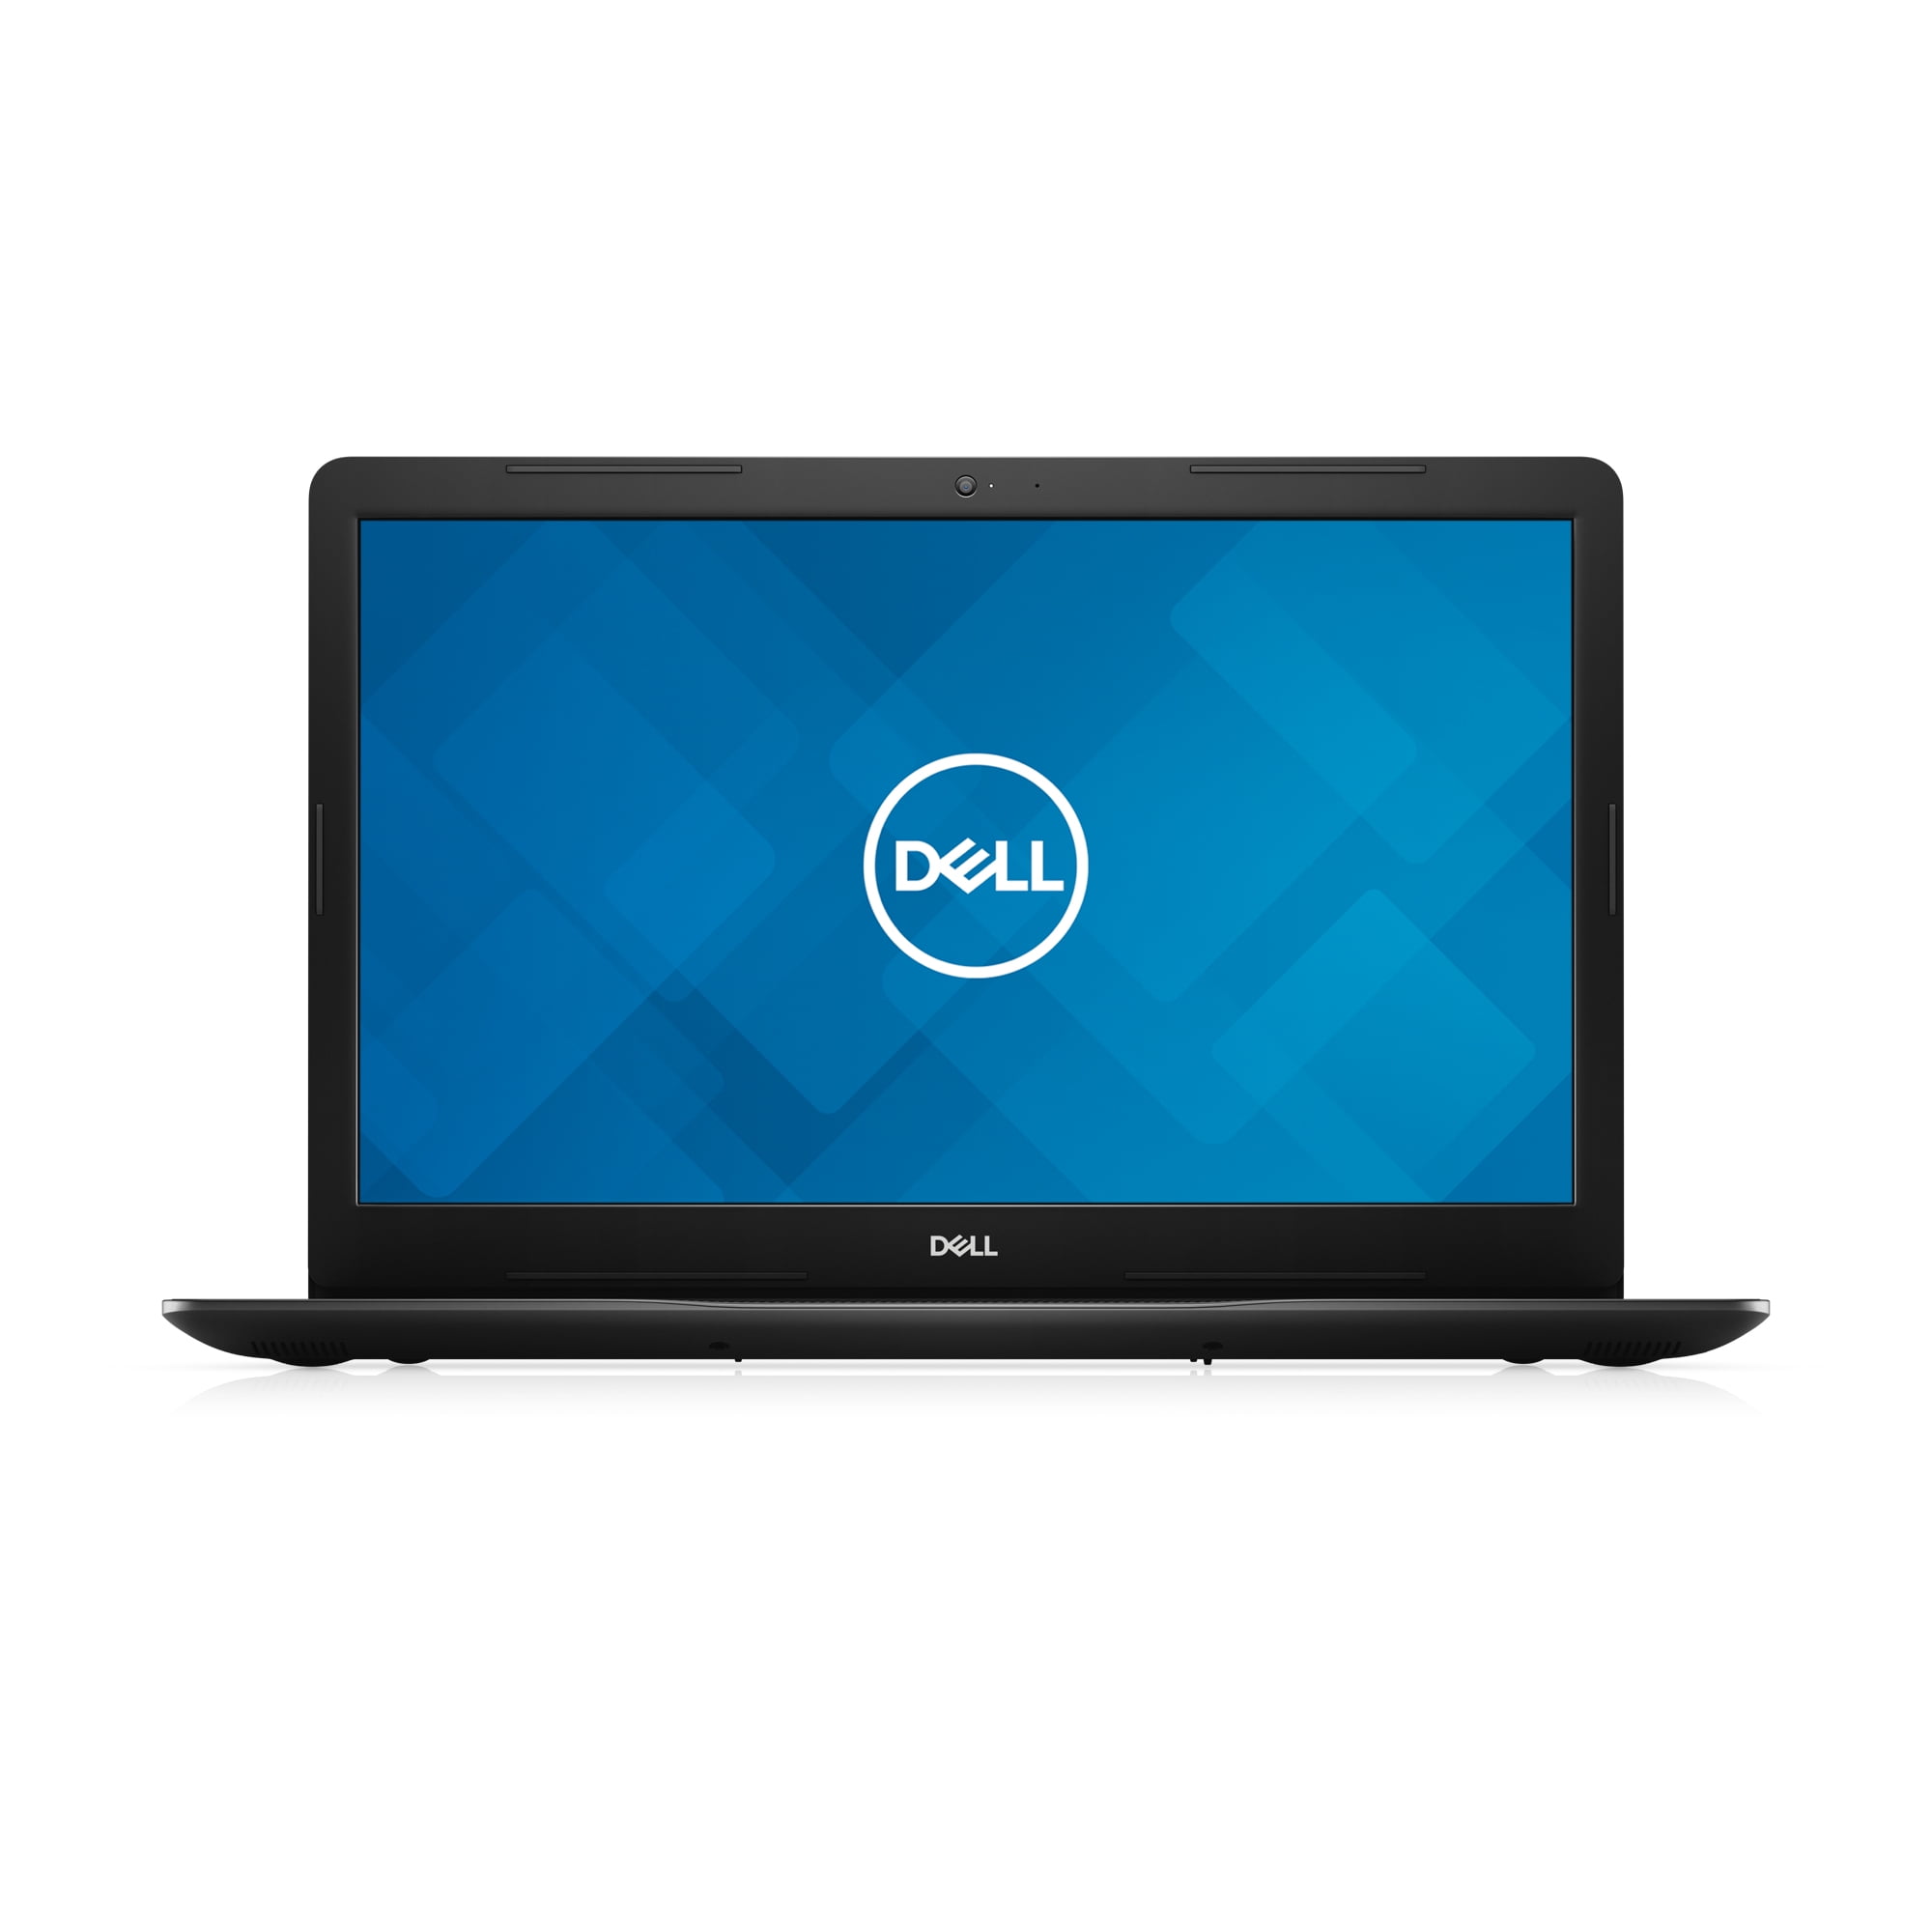 Dell Inspiron 17 3000 Series Laptop, 17.3